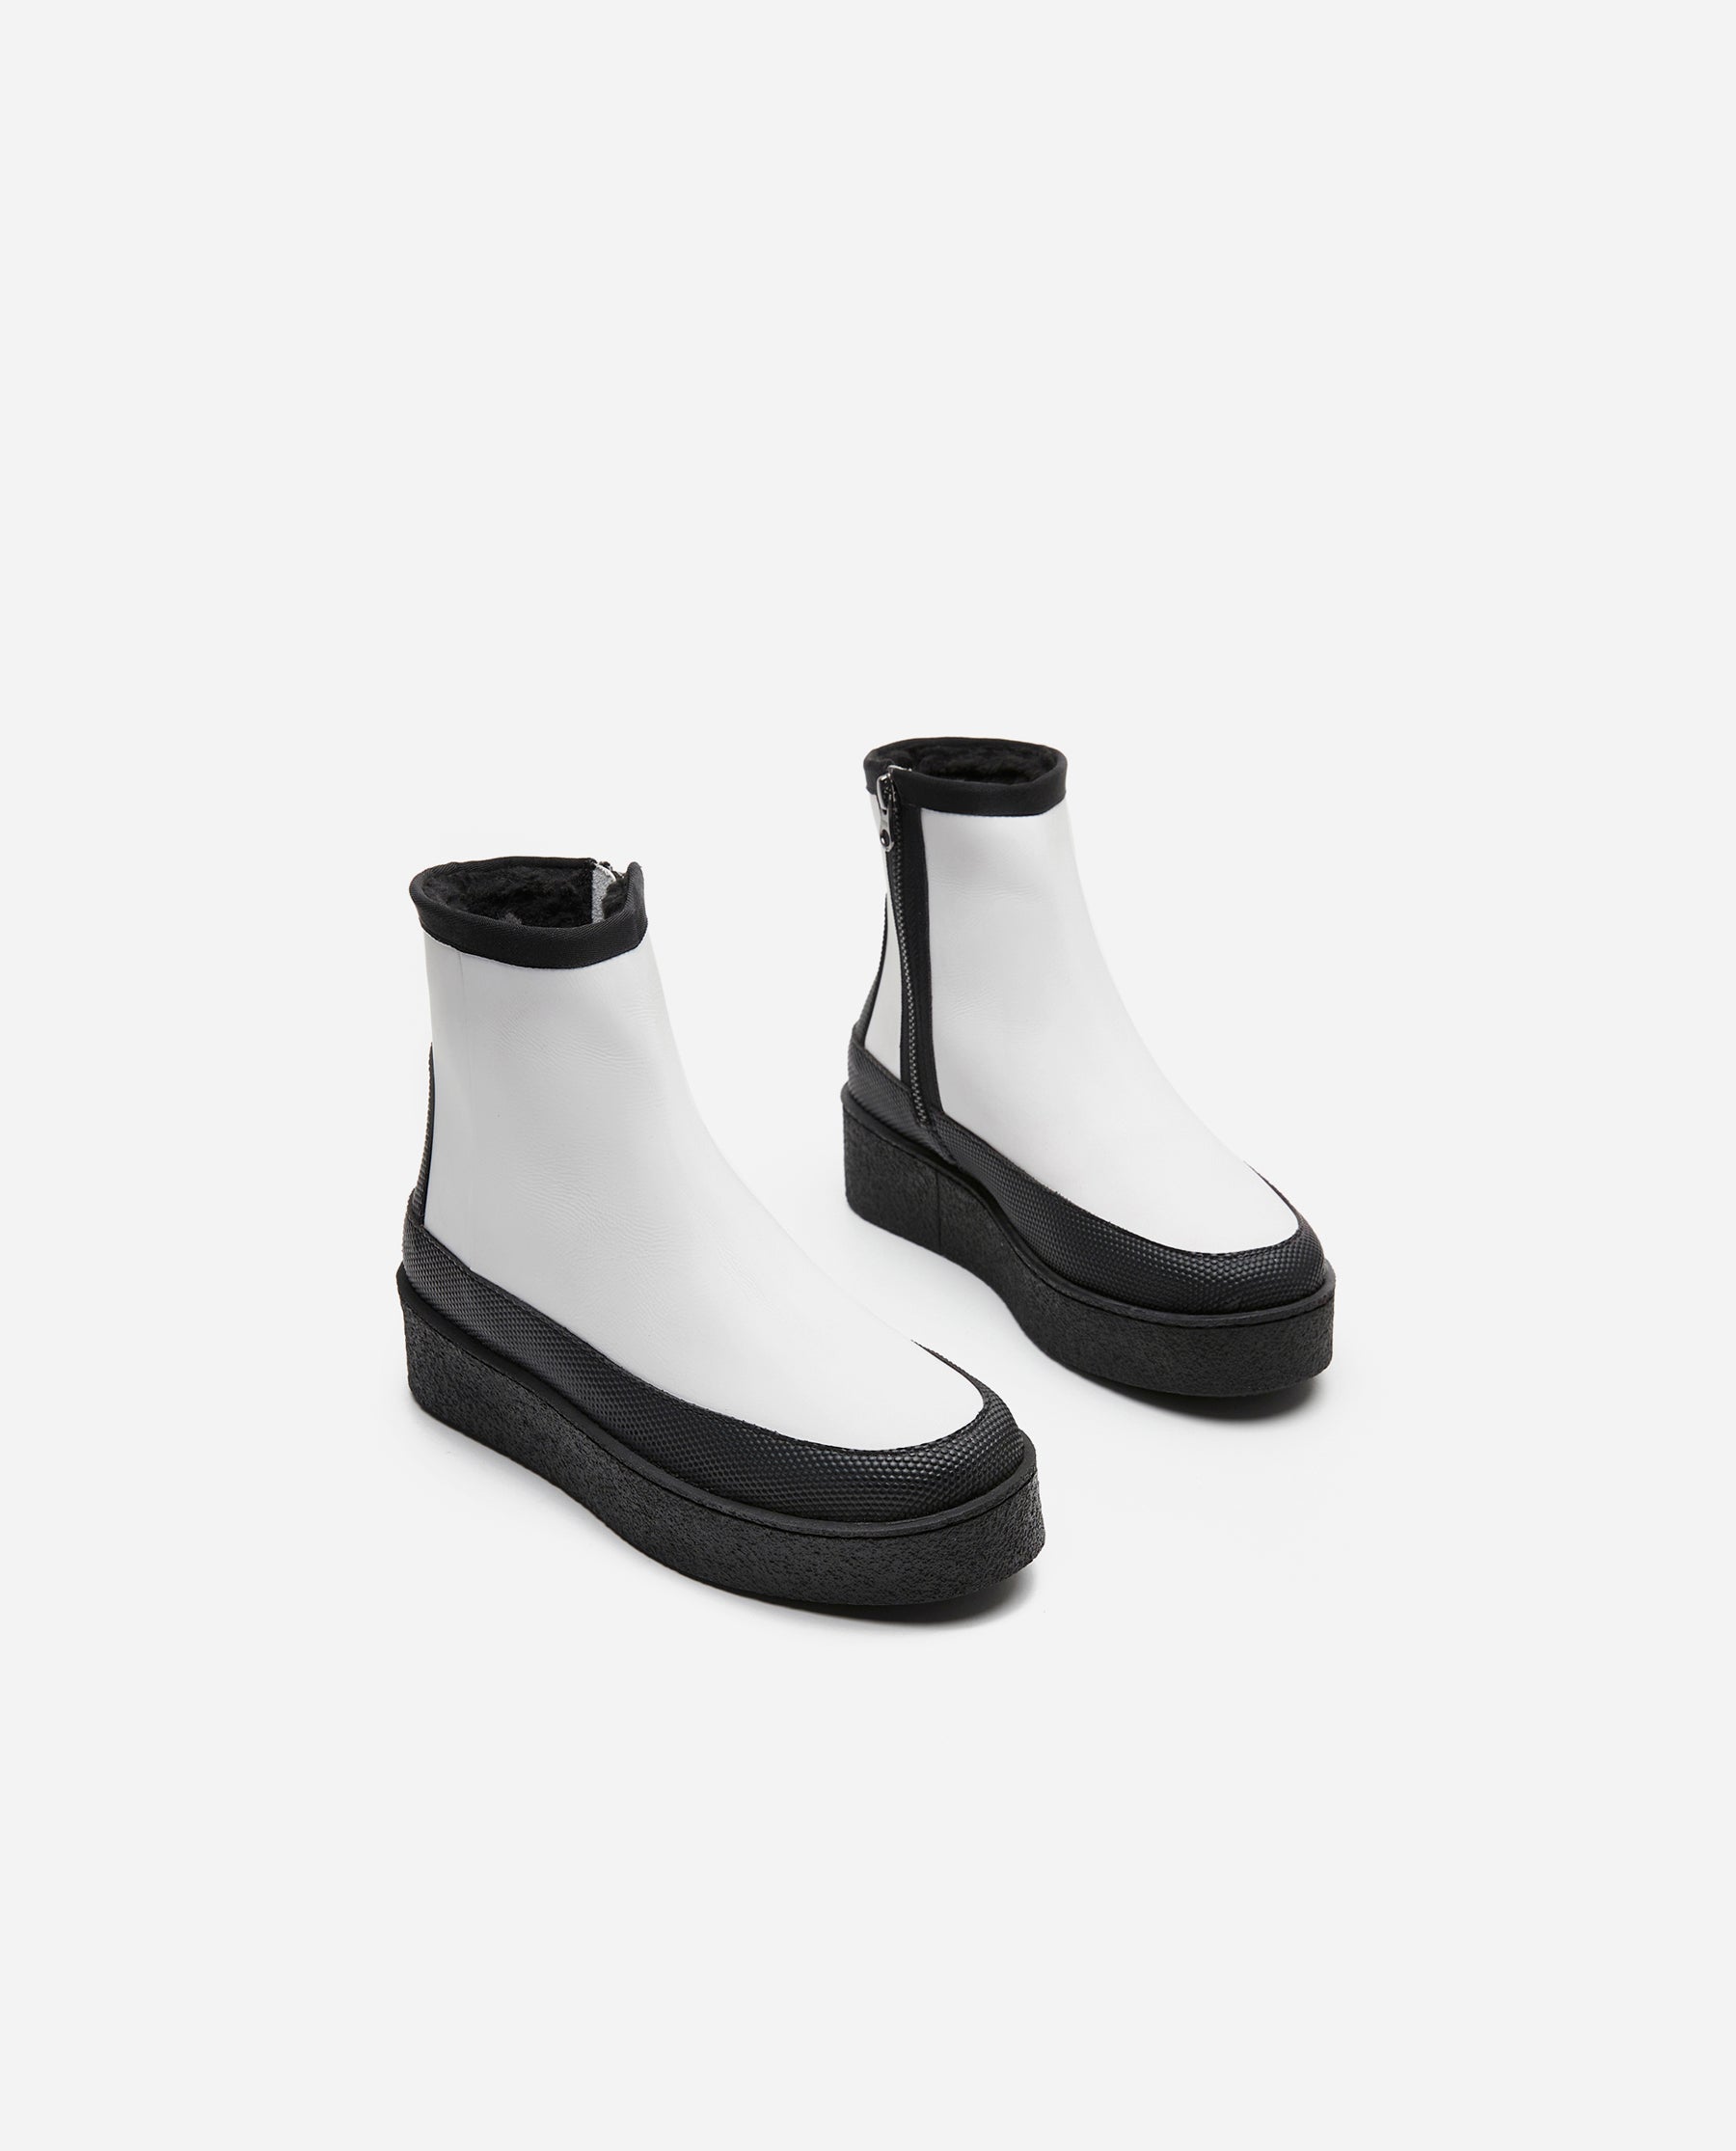 Aria White Coated Leather-Schuhe-Flattered-OUTLET-ARCHIVIST-ARCHIVE-SALE